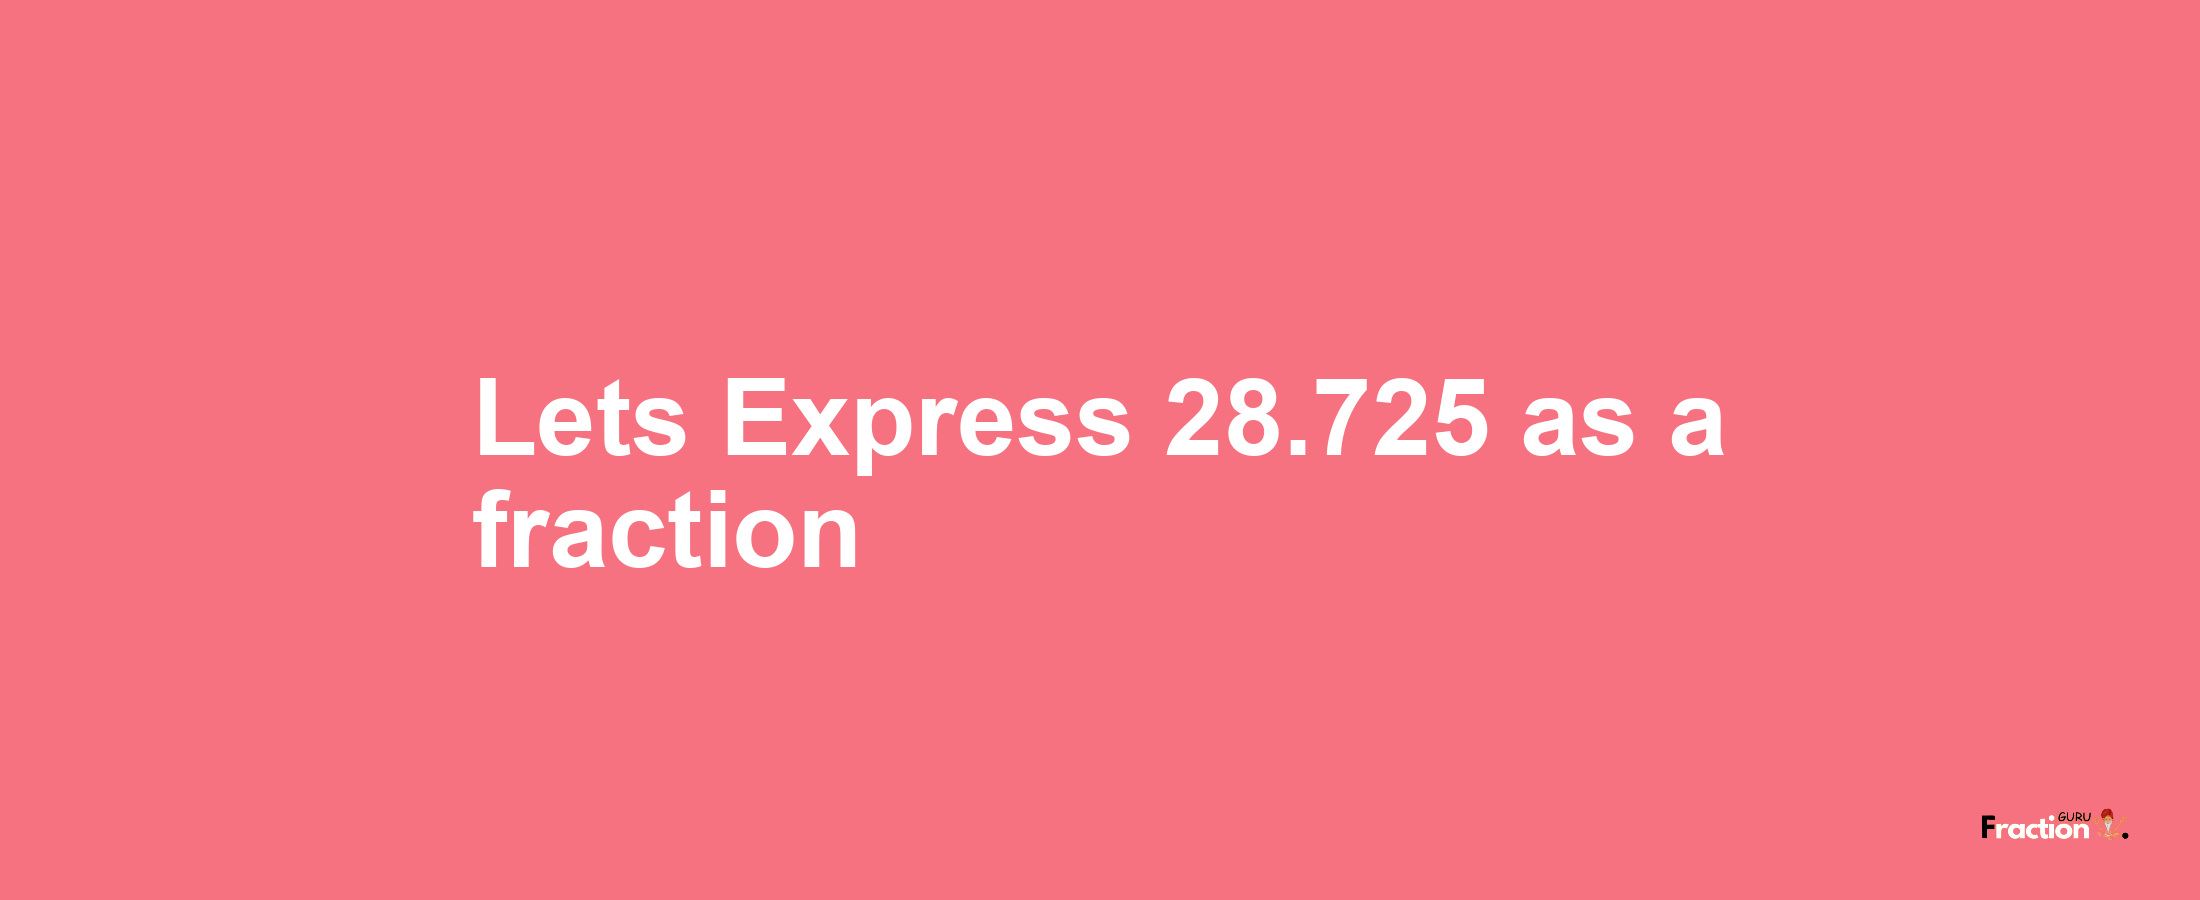 Lets Express 28.725 as afraction